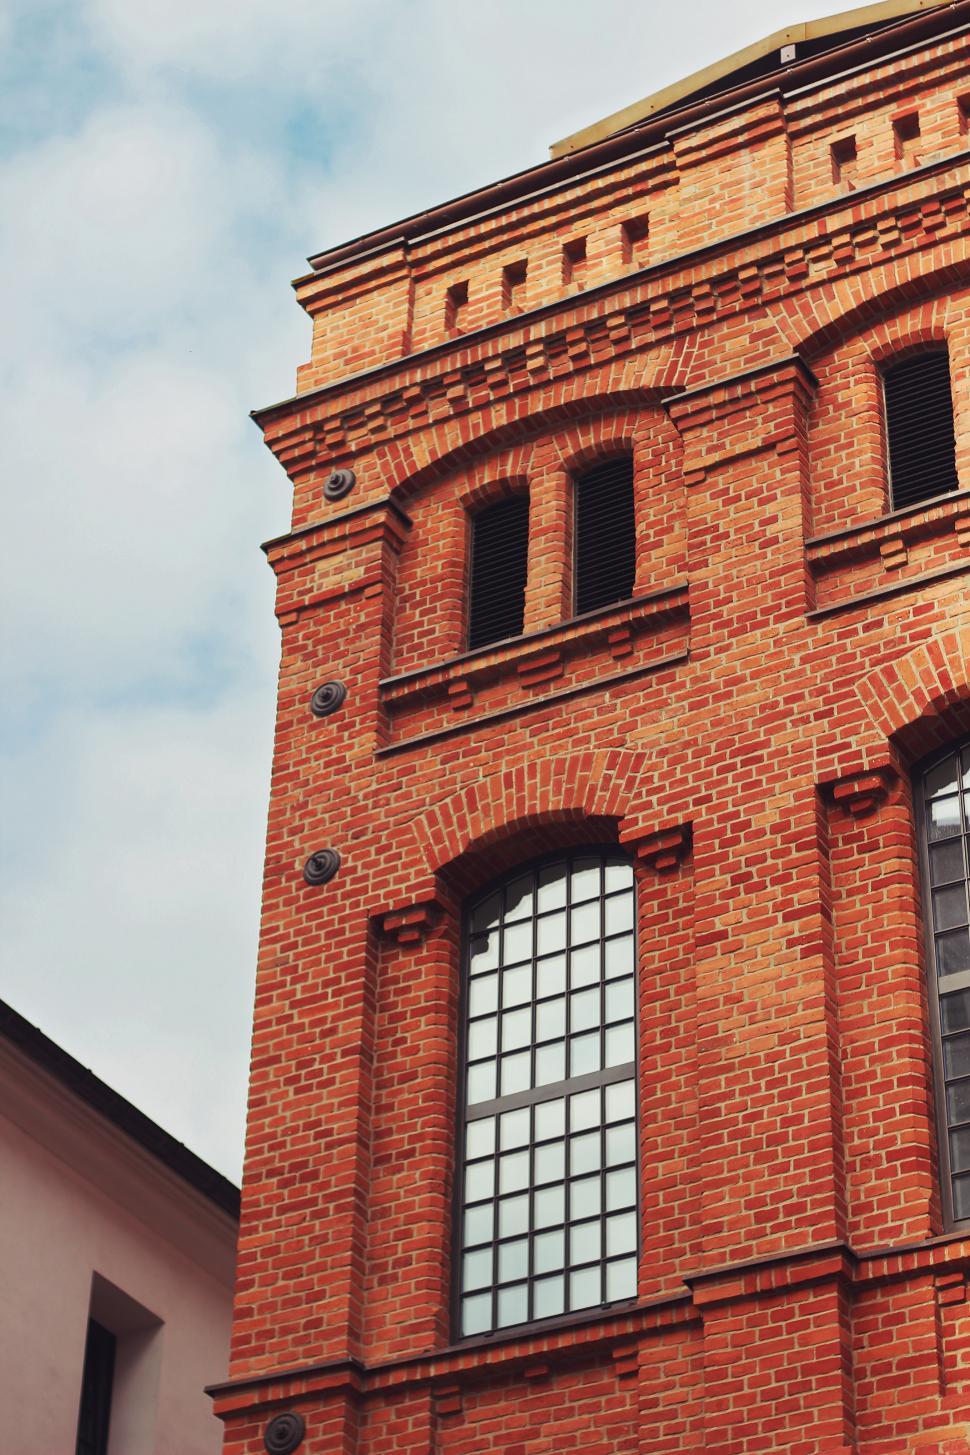 Free Image of Tall Brick Building With Clock on Side 